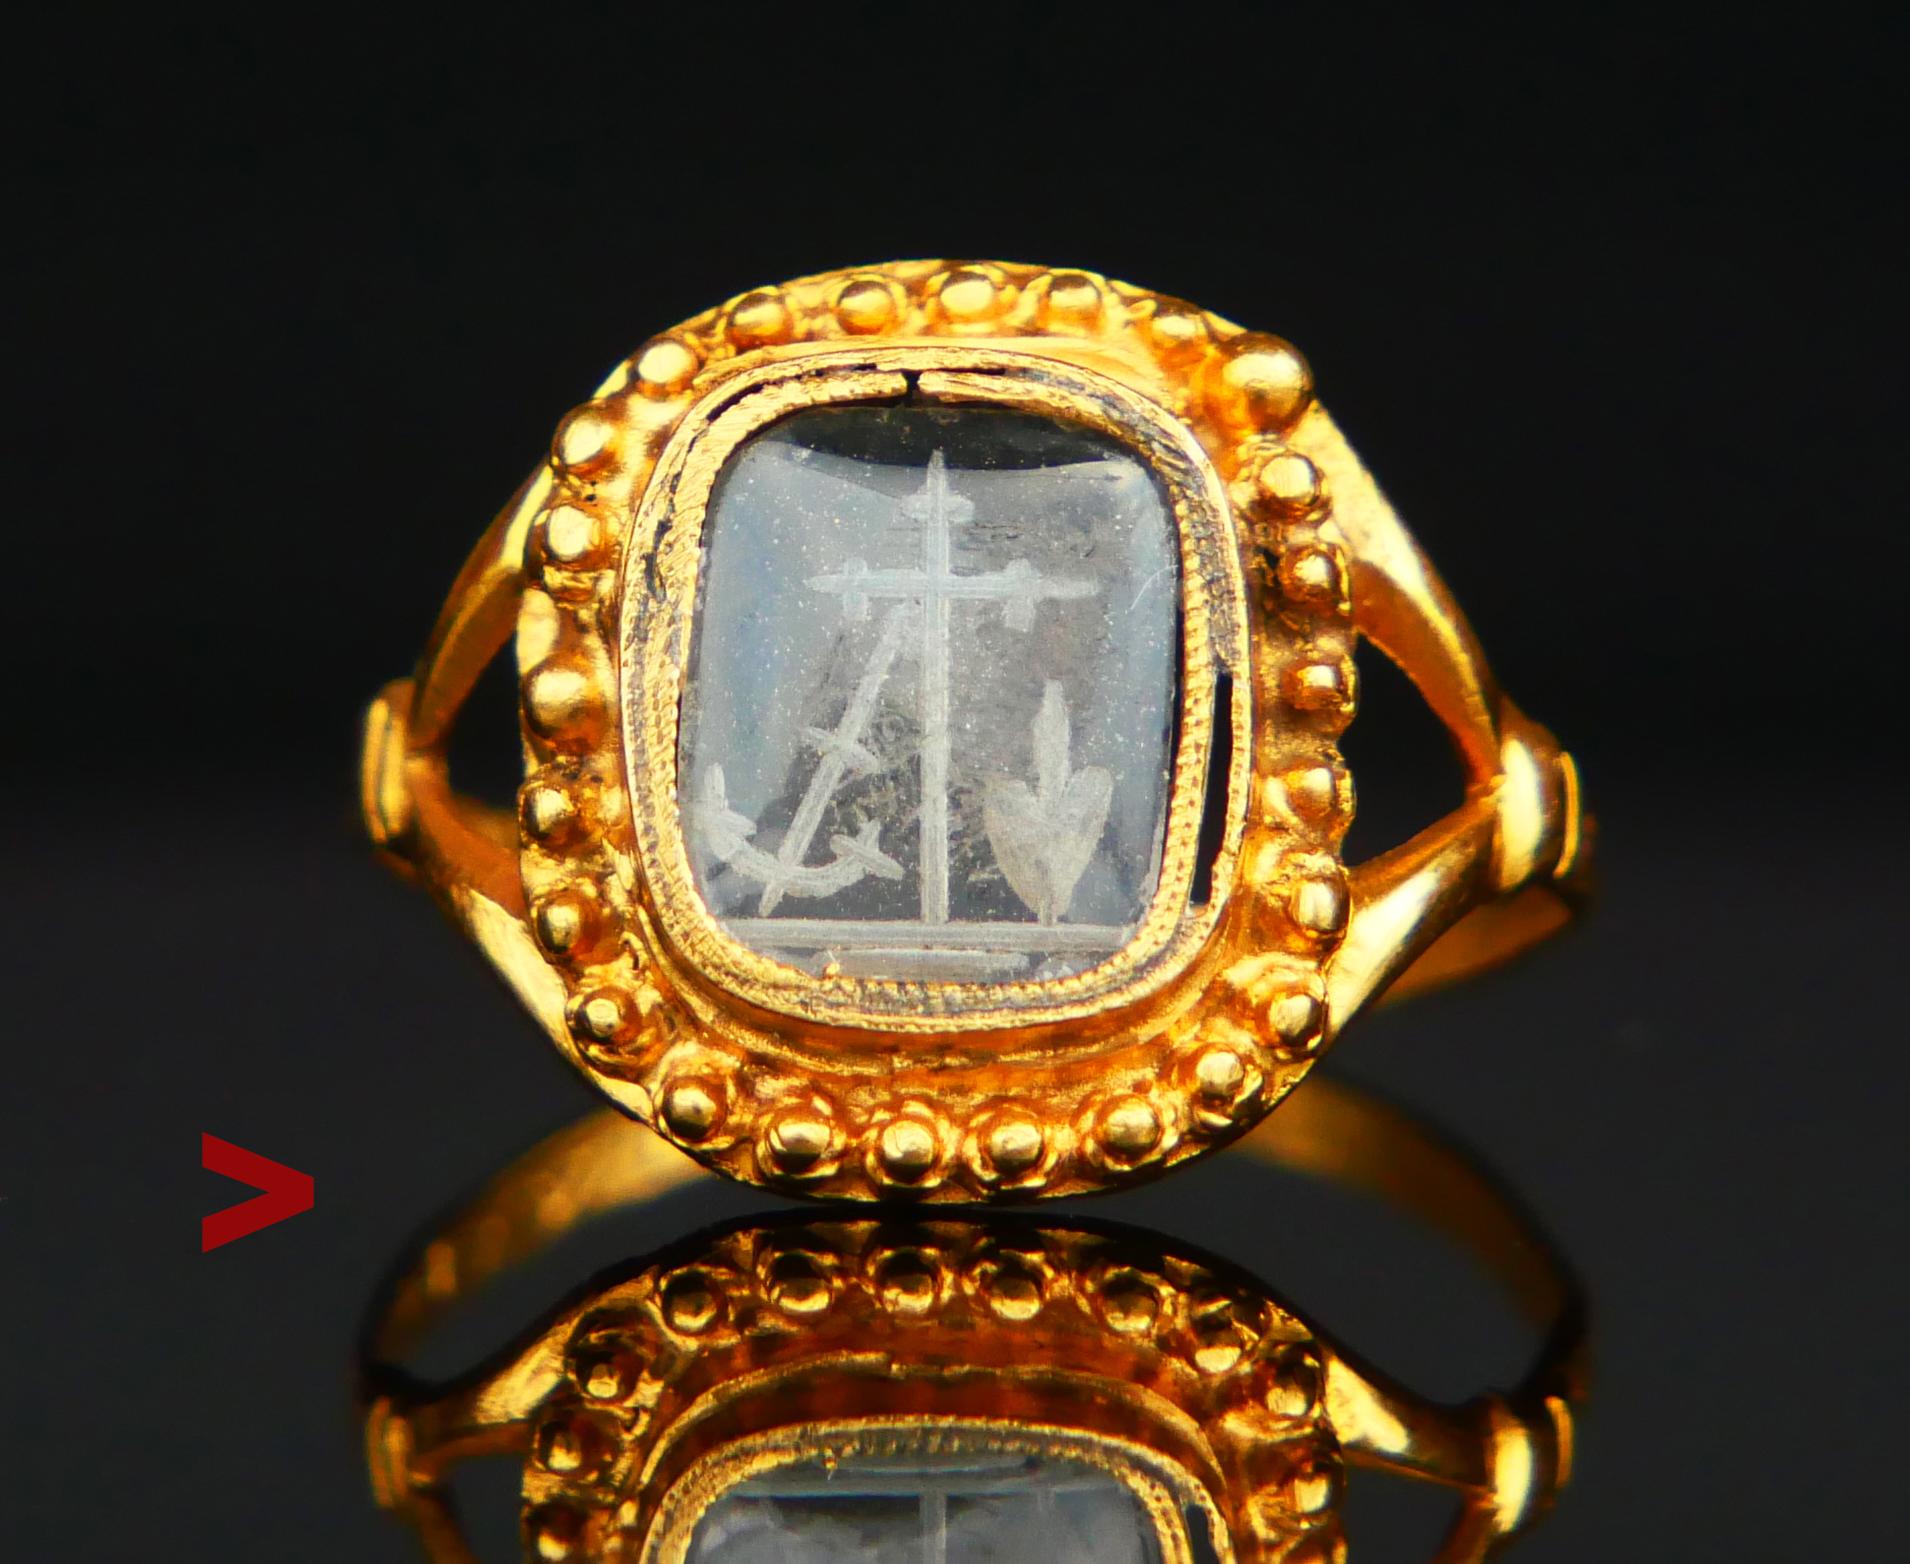 Great Signet Ring in solid 18K Yellow Gold with detailed hand - engraved intaglio with symbols of Faith Hope and Love on convex shaped paste Glass 8.3mm x 7.3mm x 1.5mm deep .Well done intaglio carving work with delicate and miniature details that